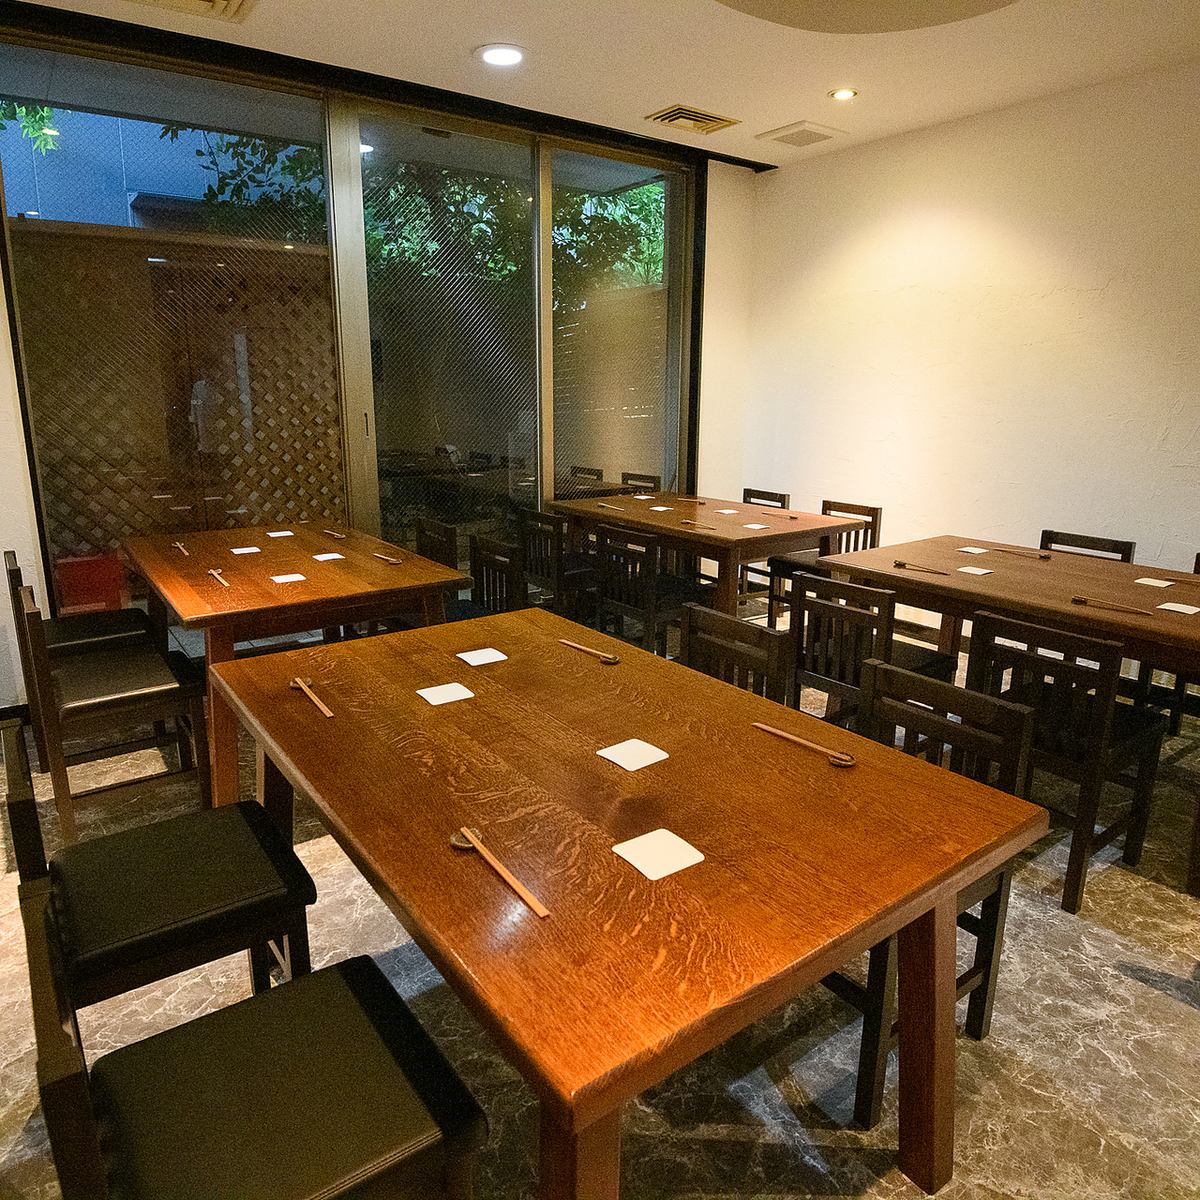 Enjoy seafood, local chicken, and creative Japanese cuisine to your heart's content in a calm Japanese space.